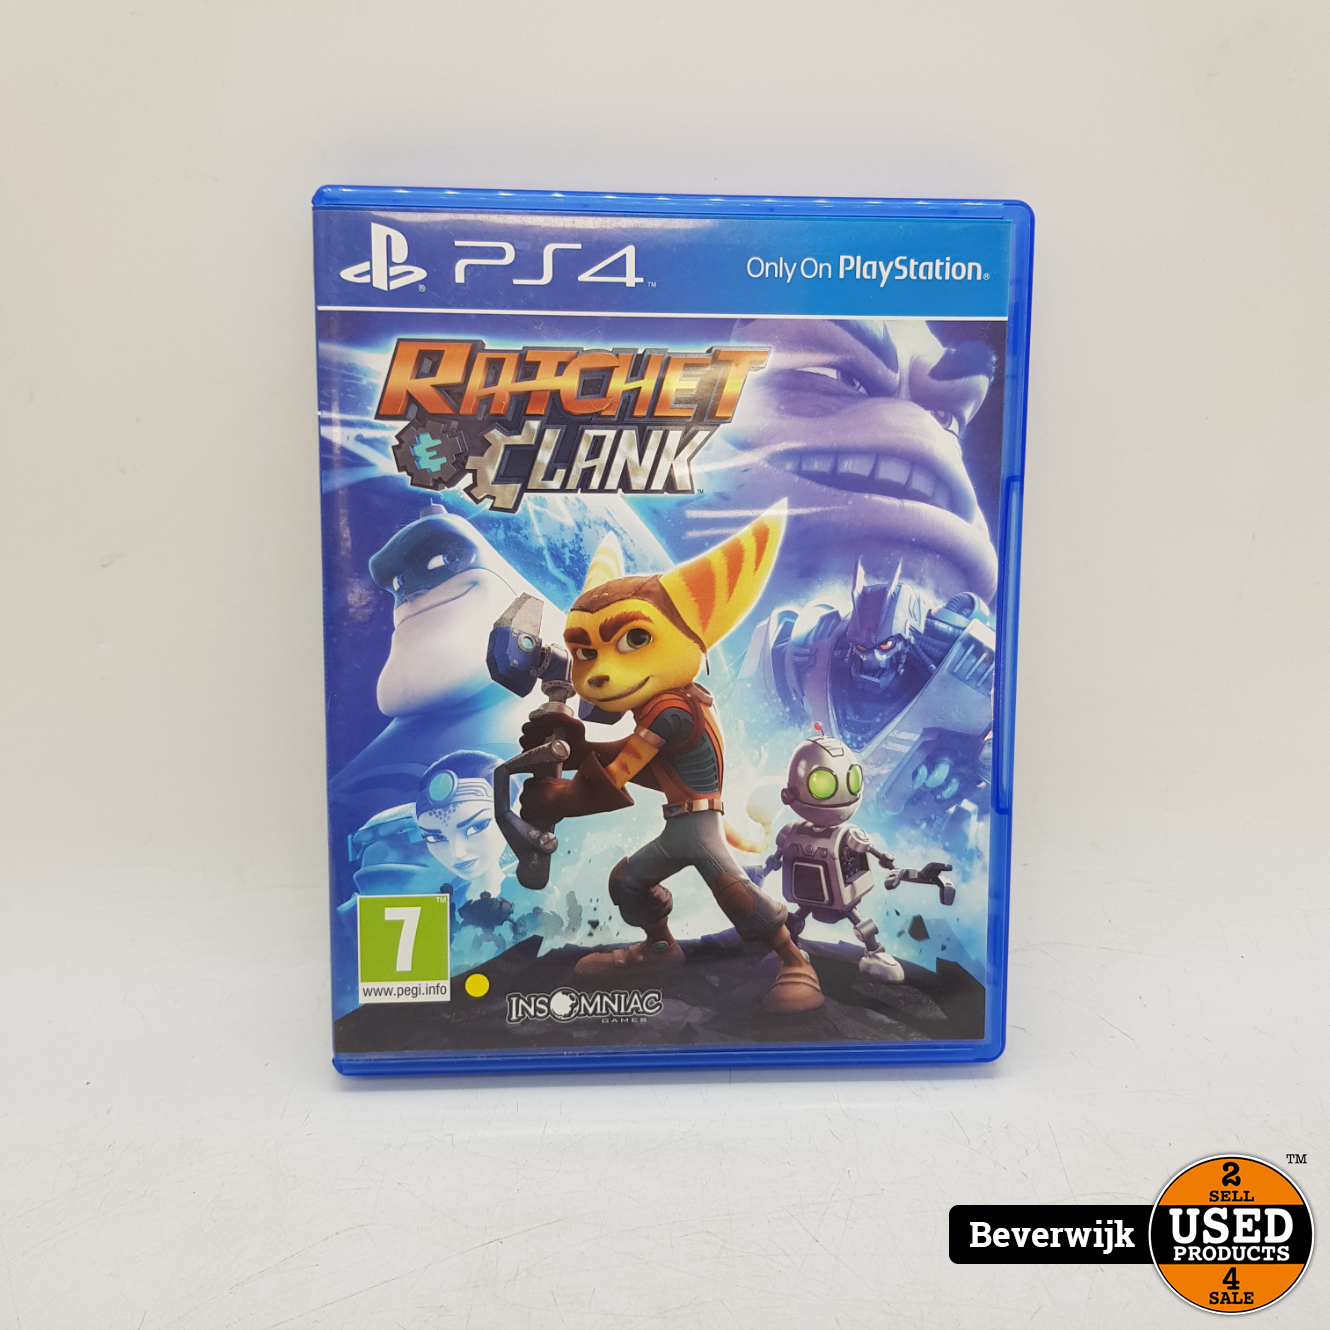 Graf Mentor naaimachine Ratchet Clank - PS4 Game - Used Products Beverwijk